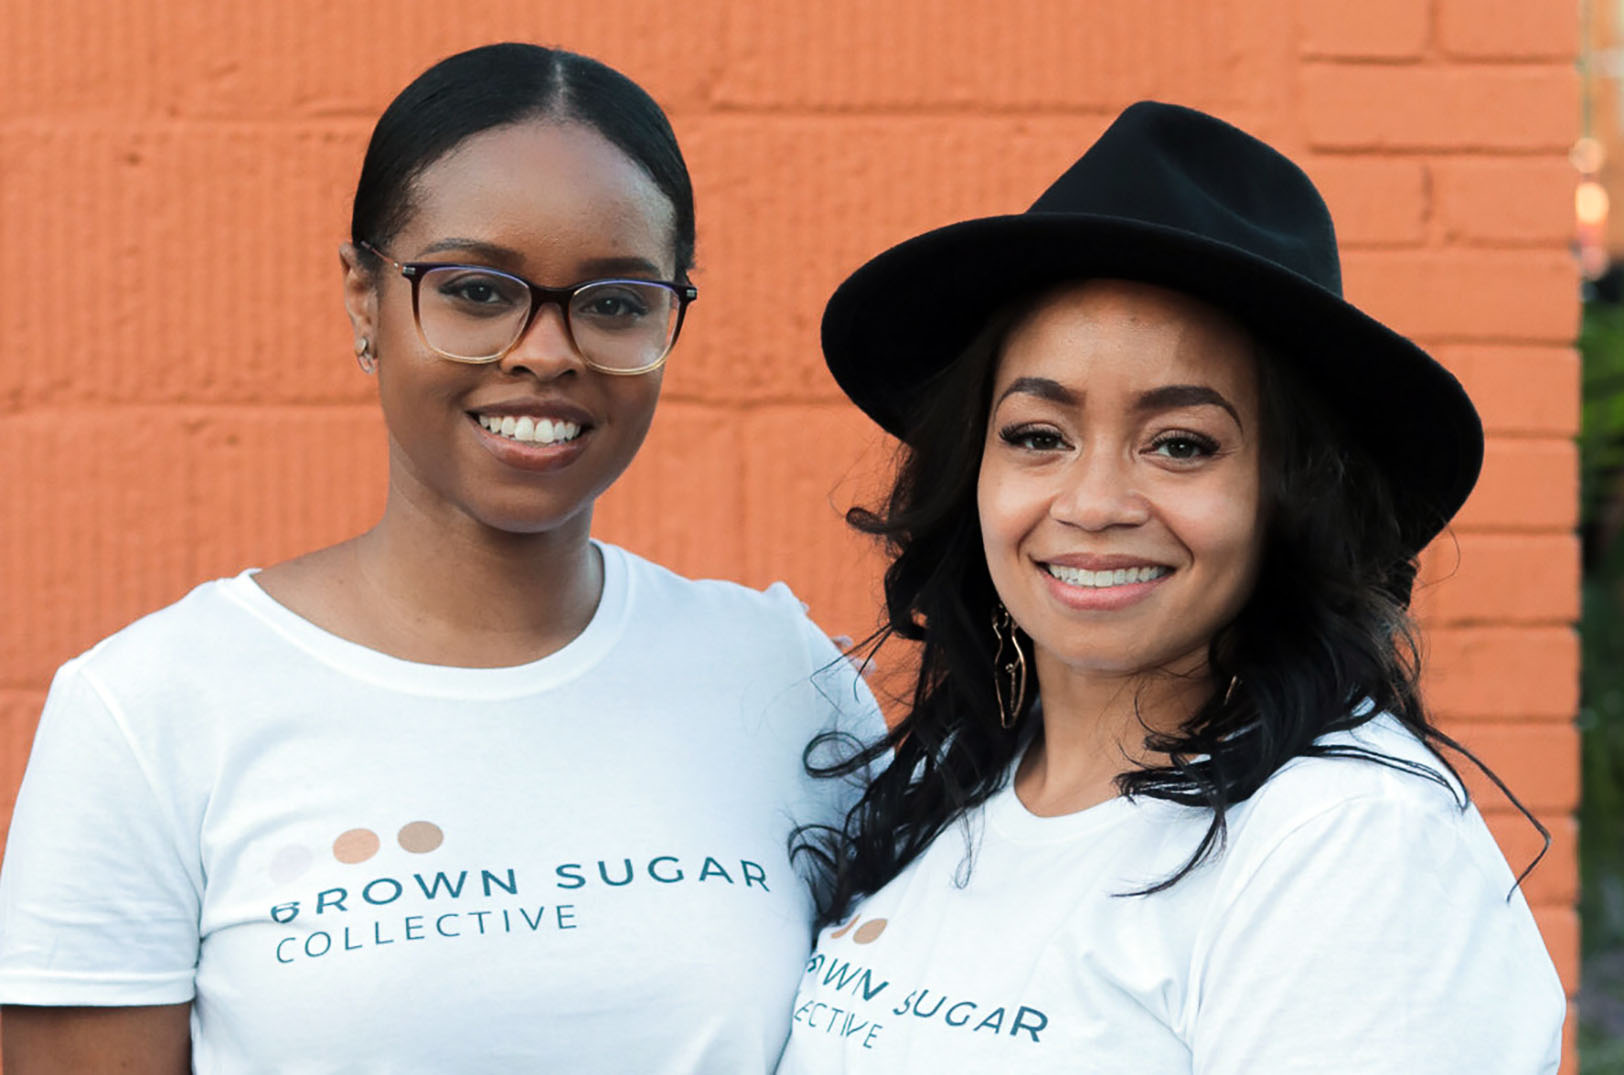 Brown Sugar Collective promises sisterhood of support, collaboration for women of color